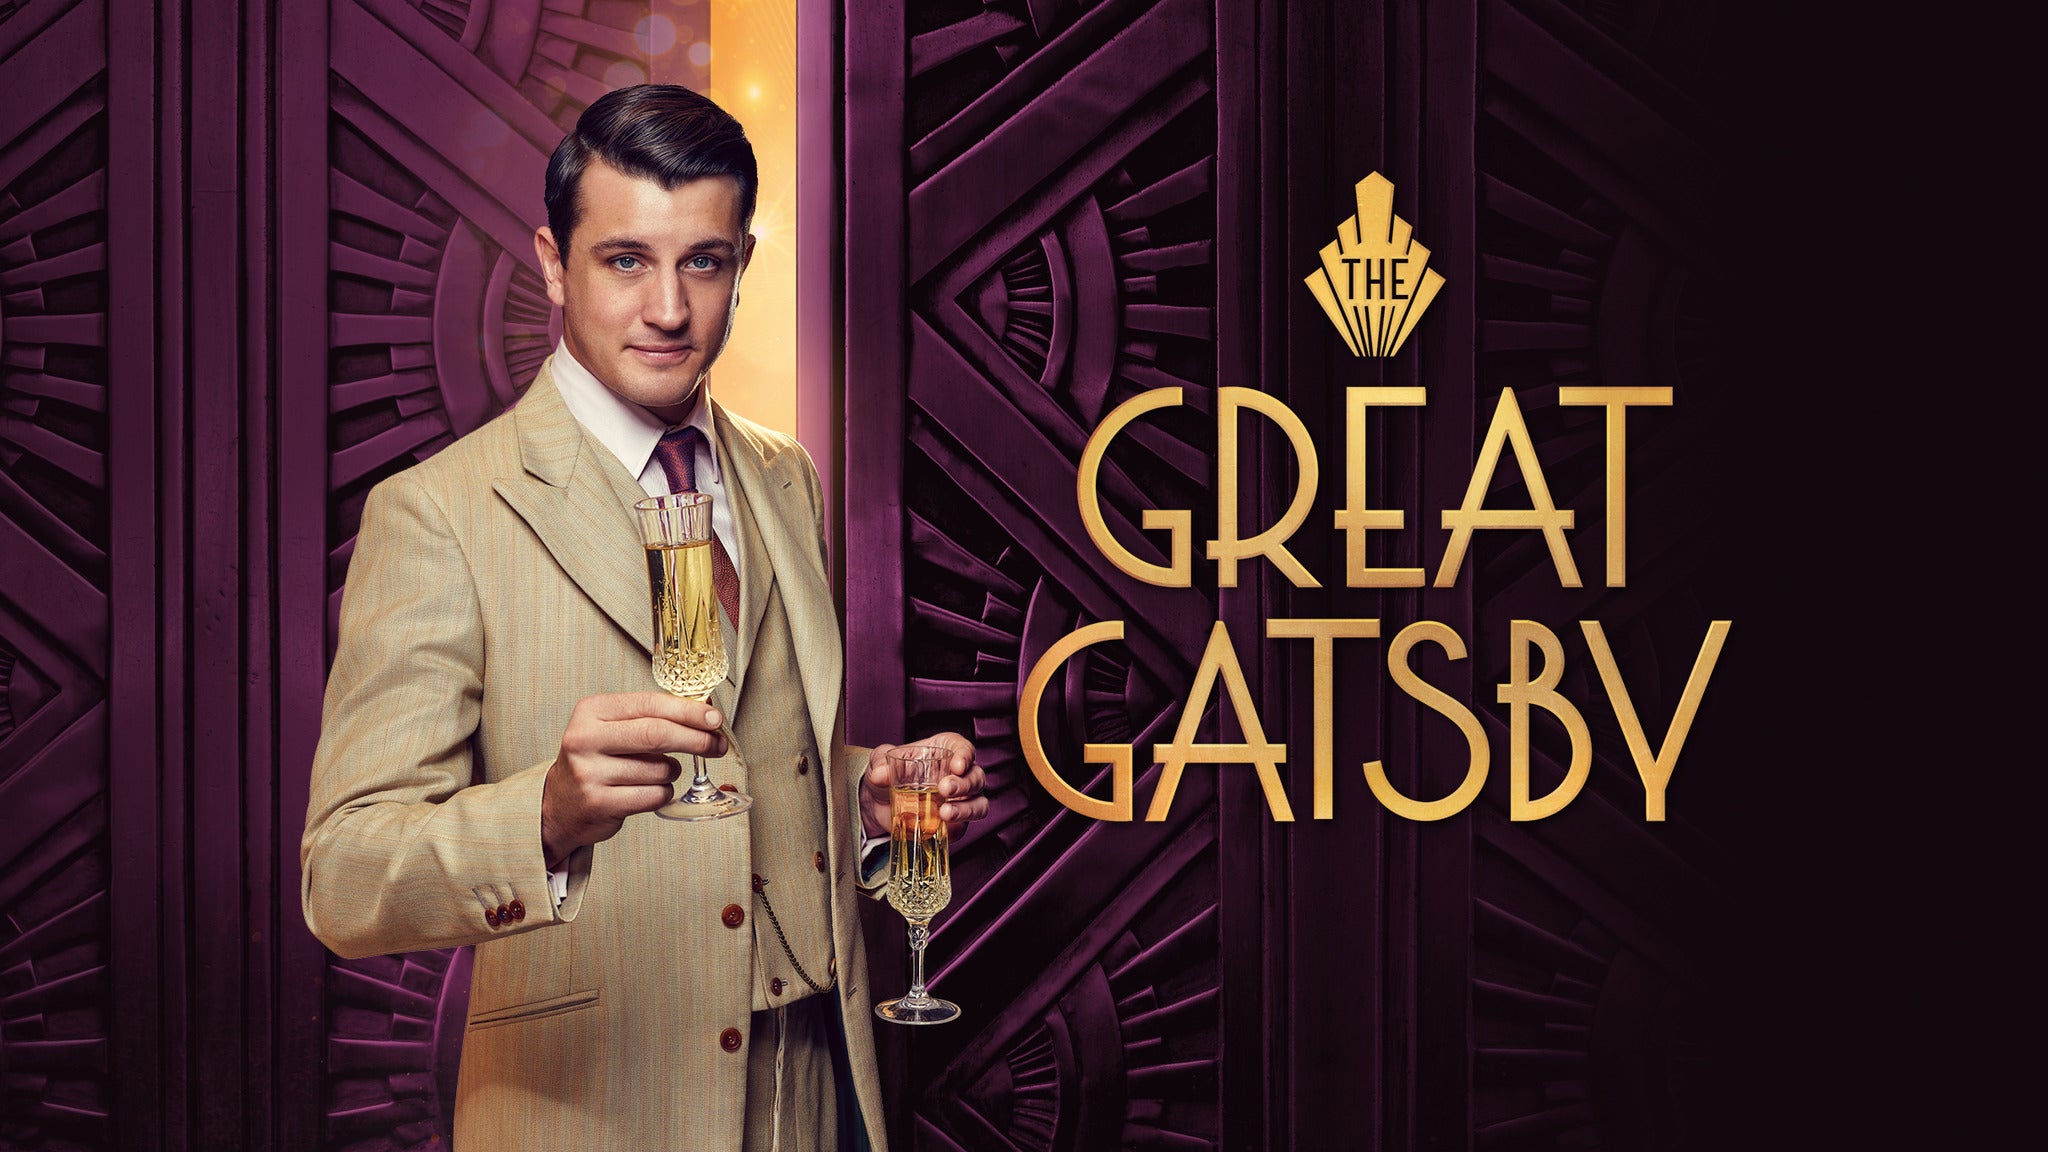 The Great Gatsby - Immersive Event Title Pic